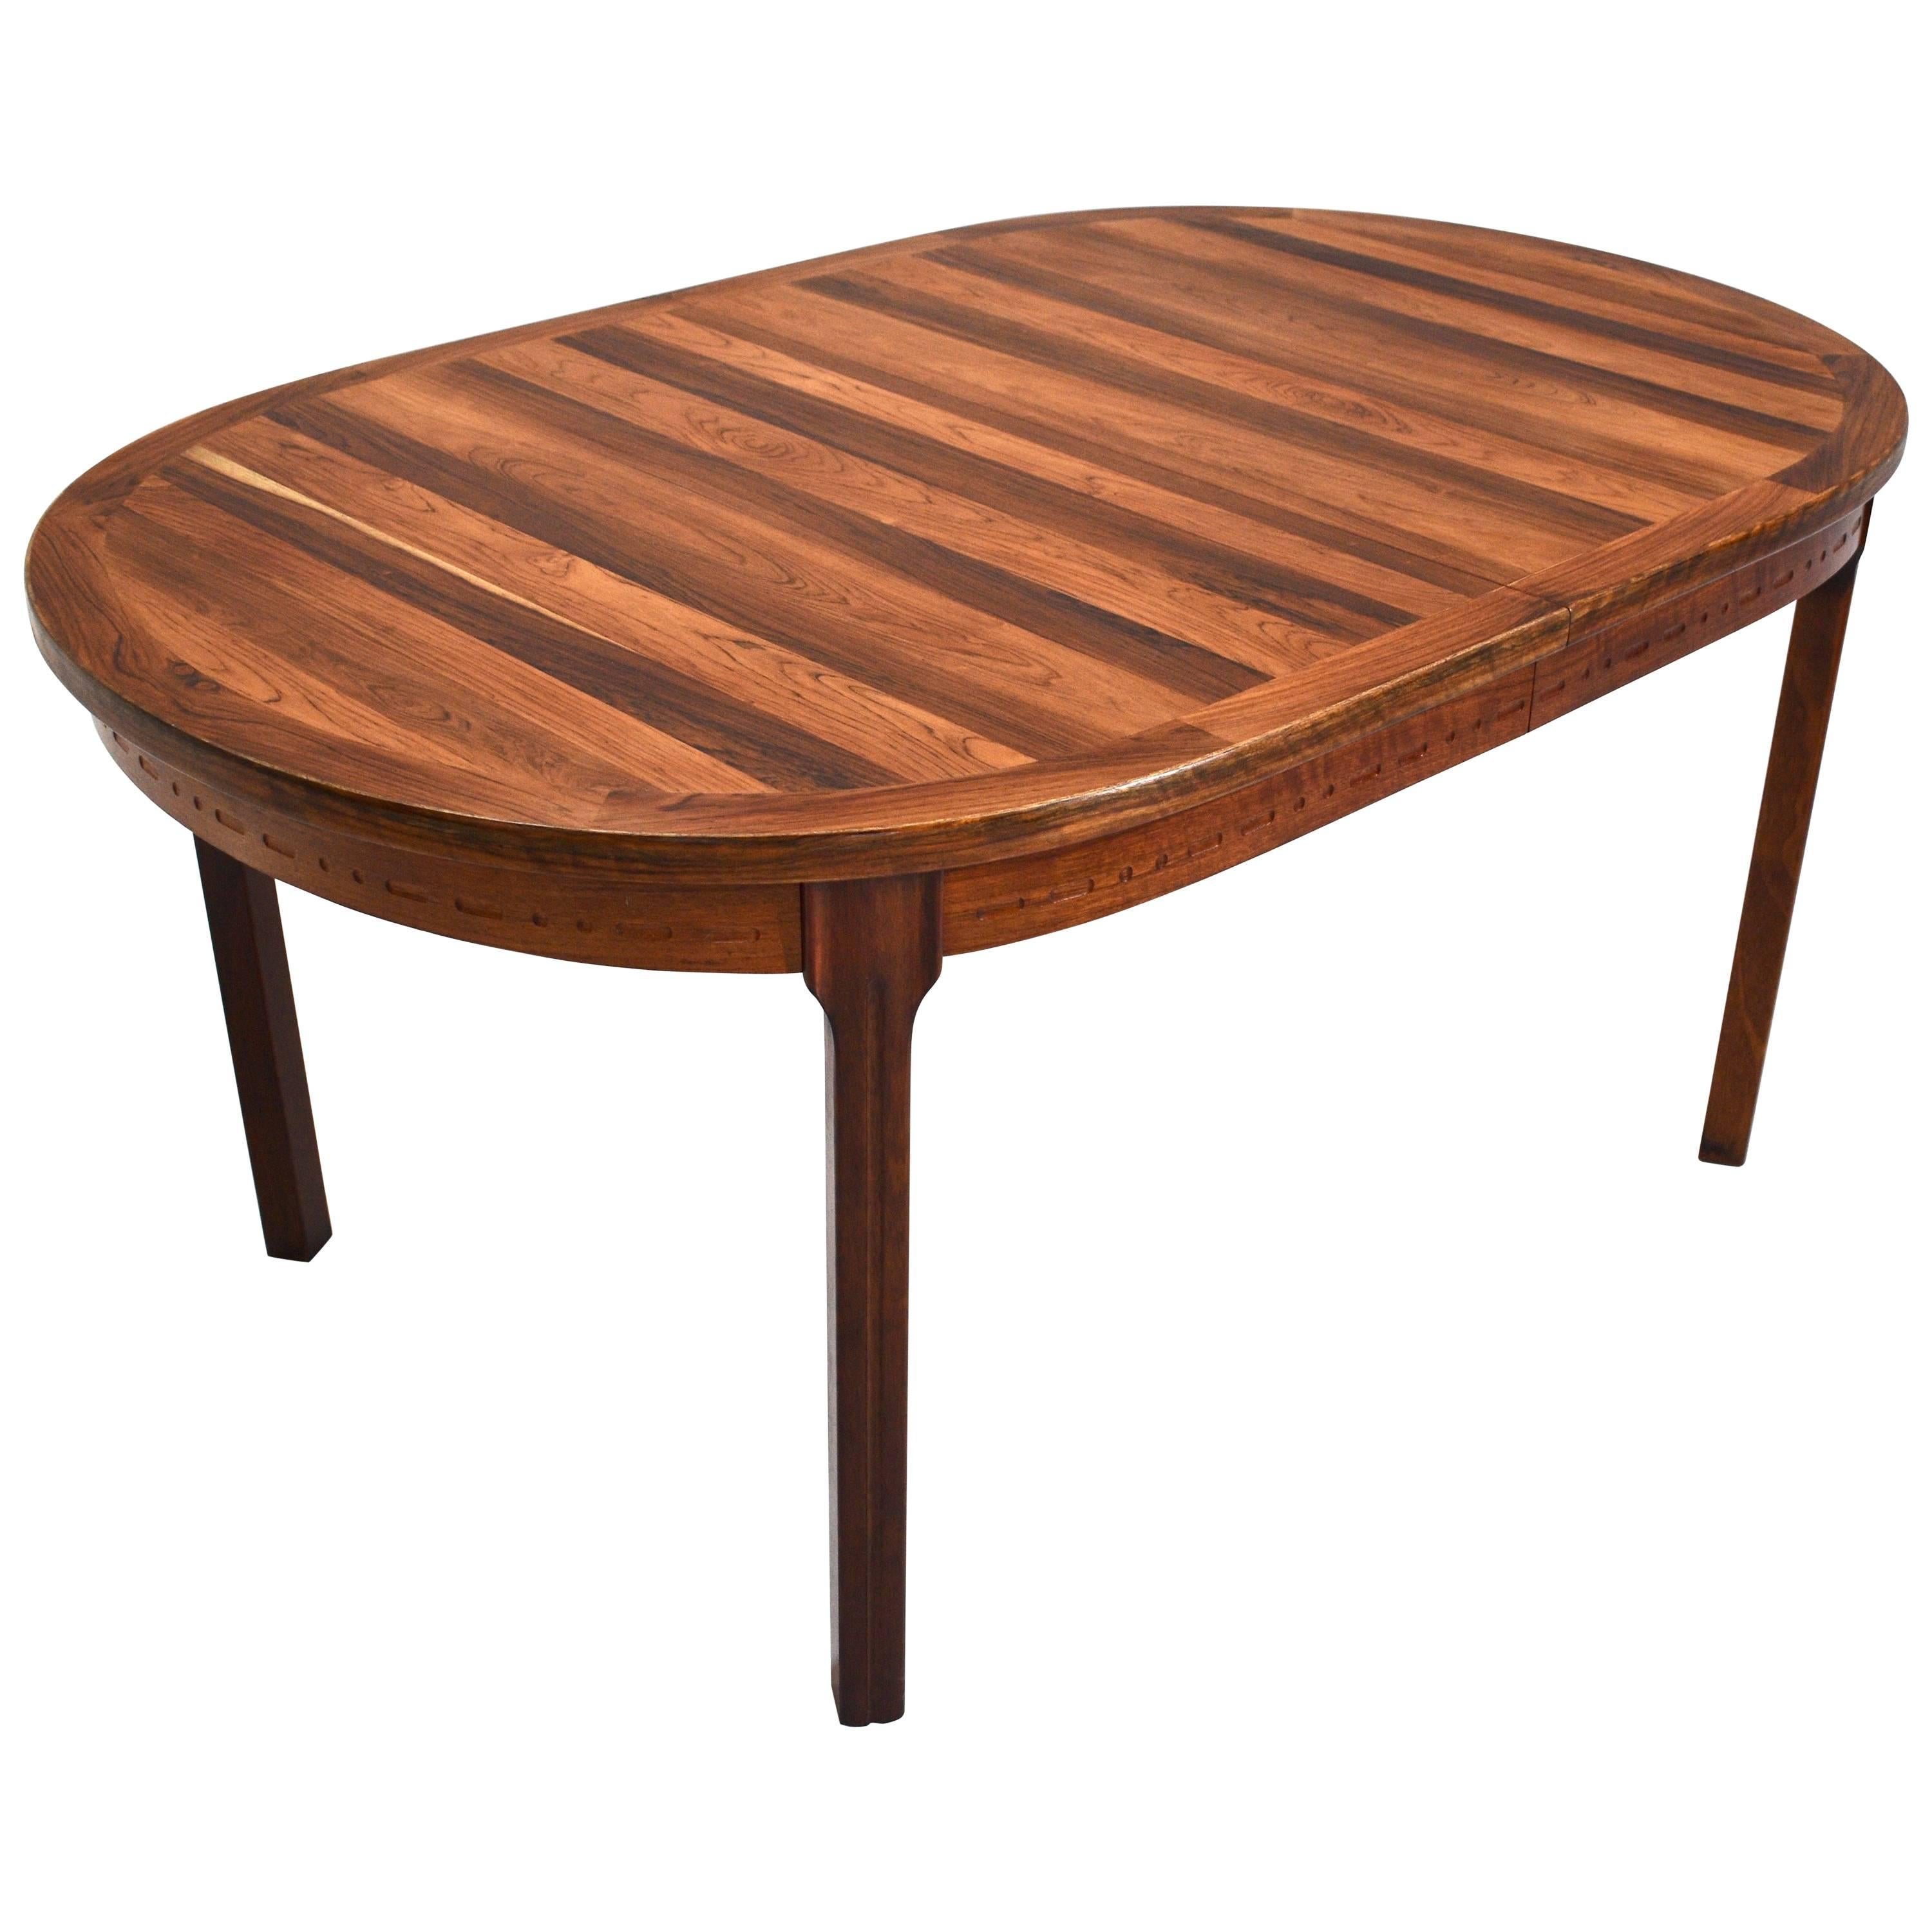 Swedish Nils Jonsson Rosewood Oval Dining Table Midcentury, 1960s For Sale